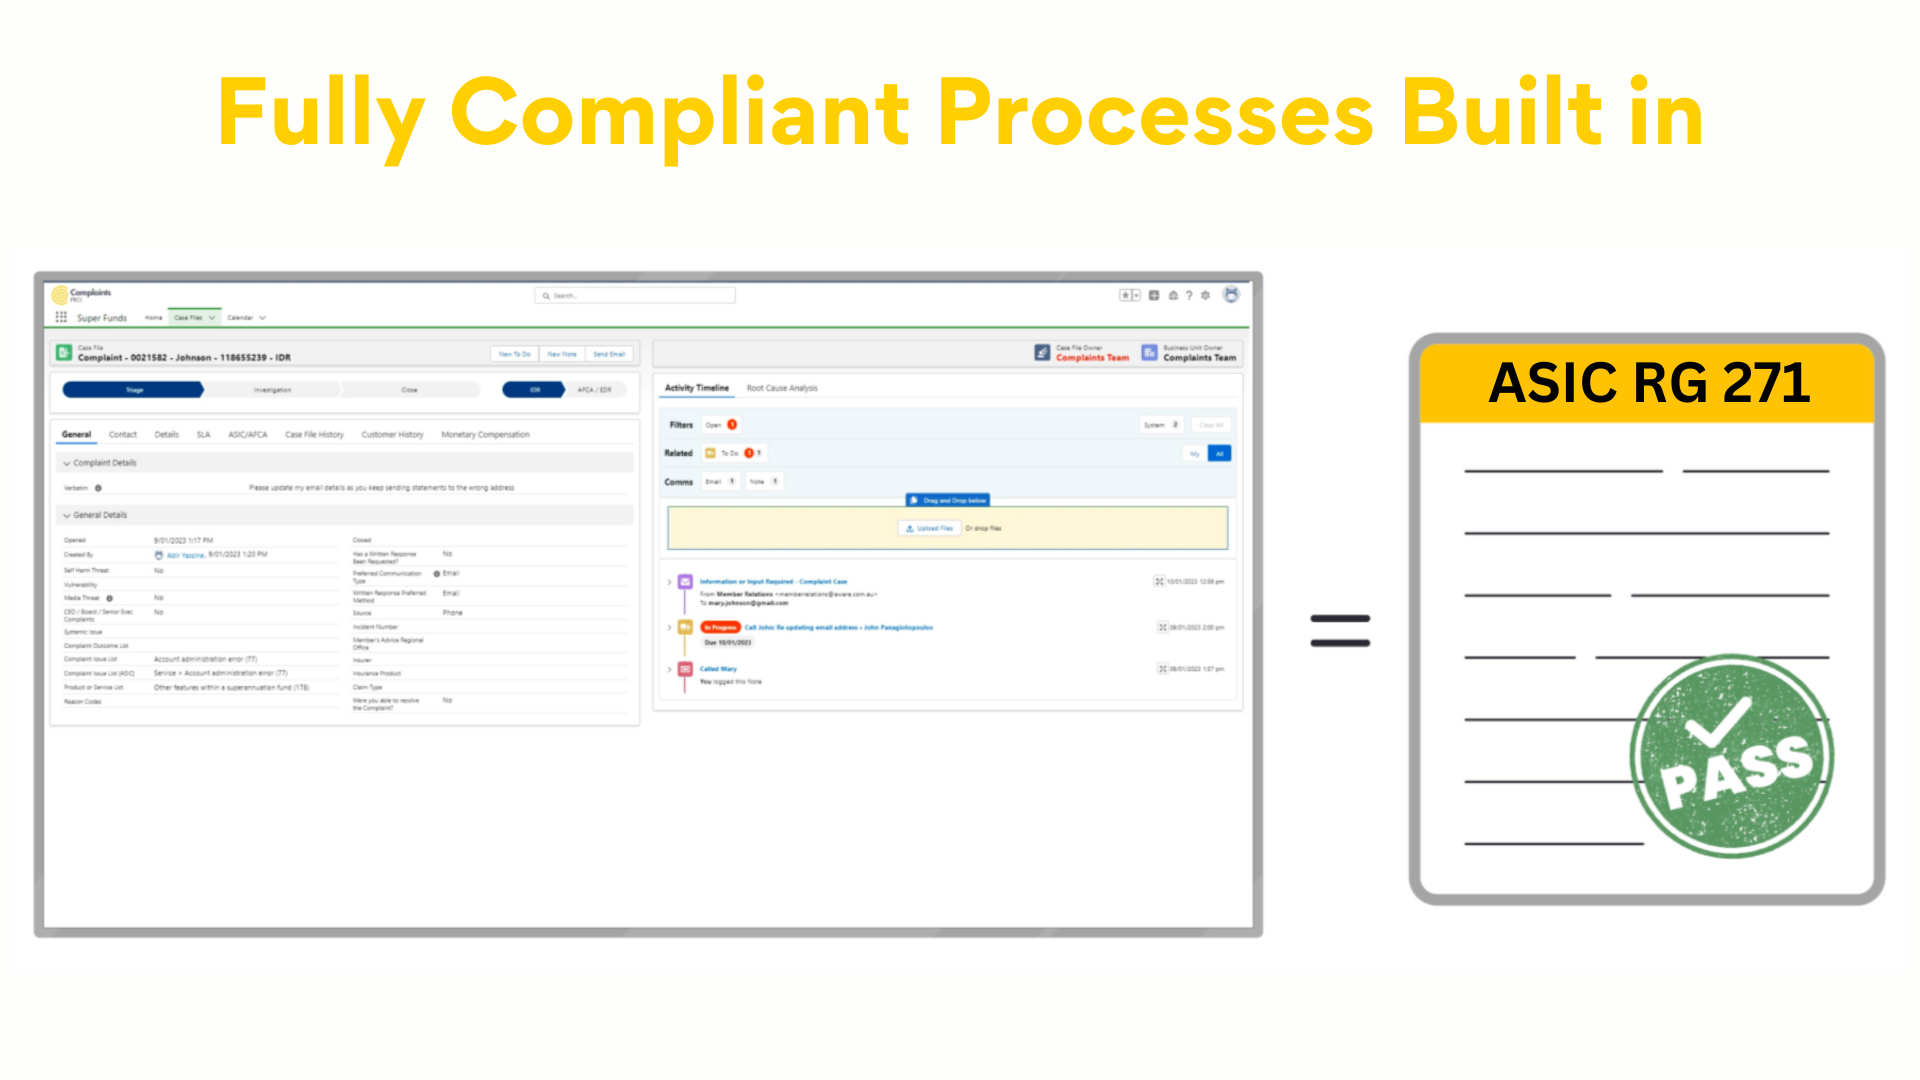 Fully Compliant Processes Built in (RG271)